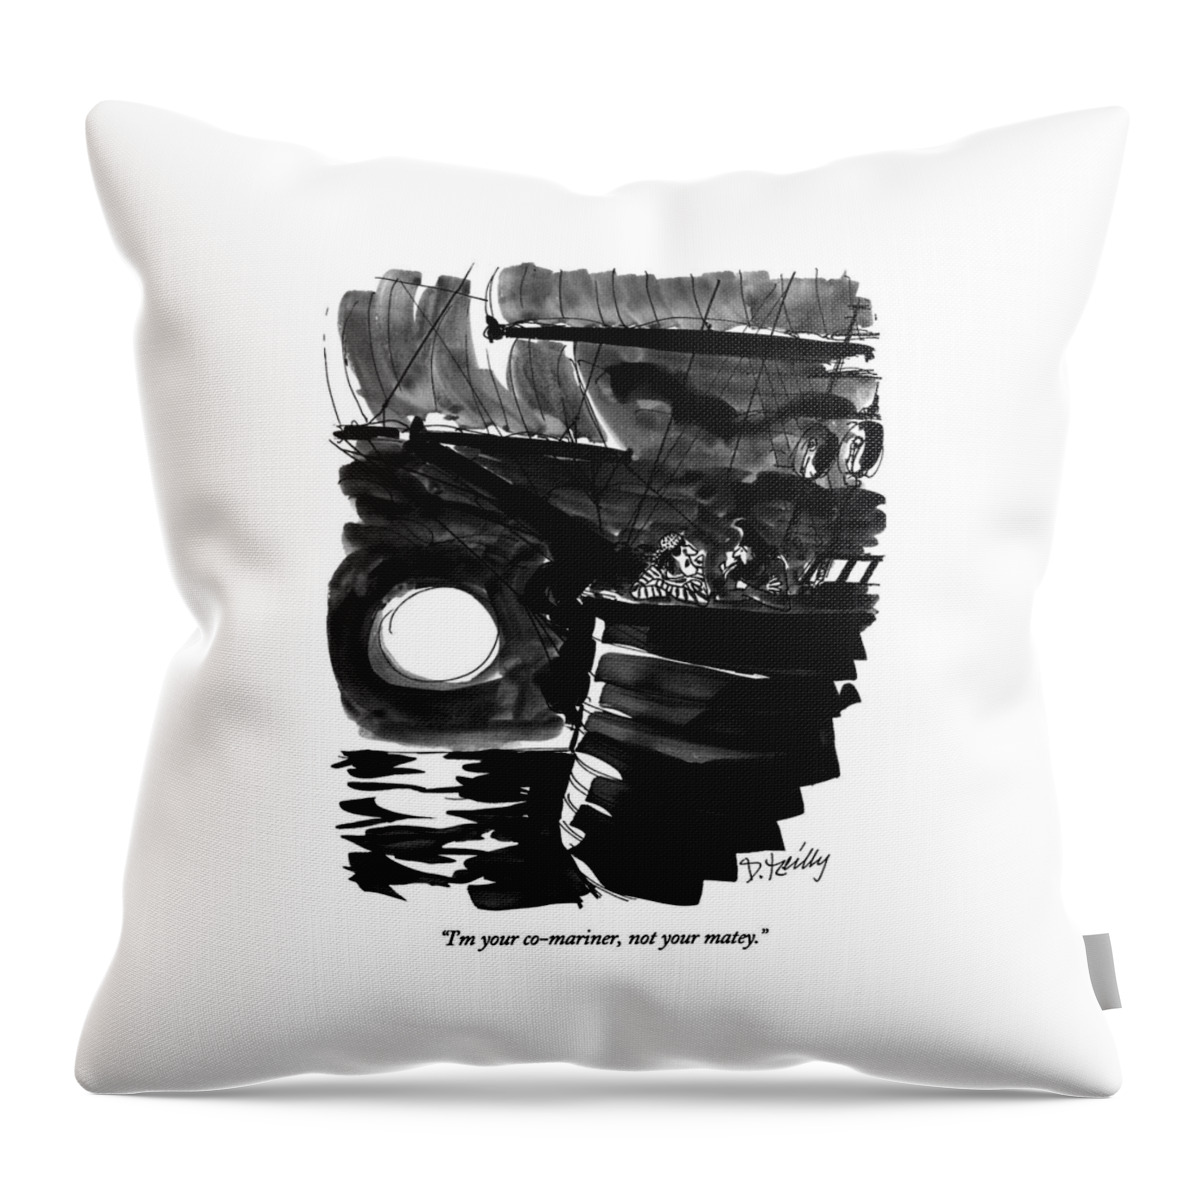 I'm Your Co-mariner Throw Pillow